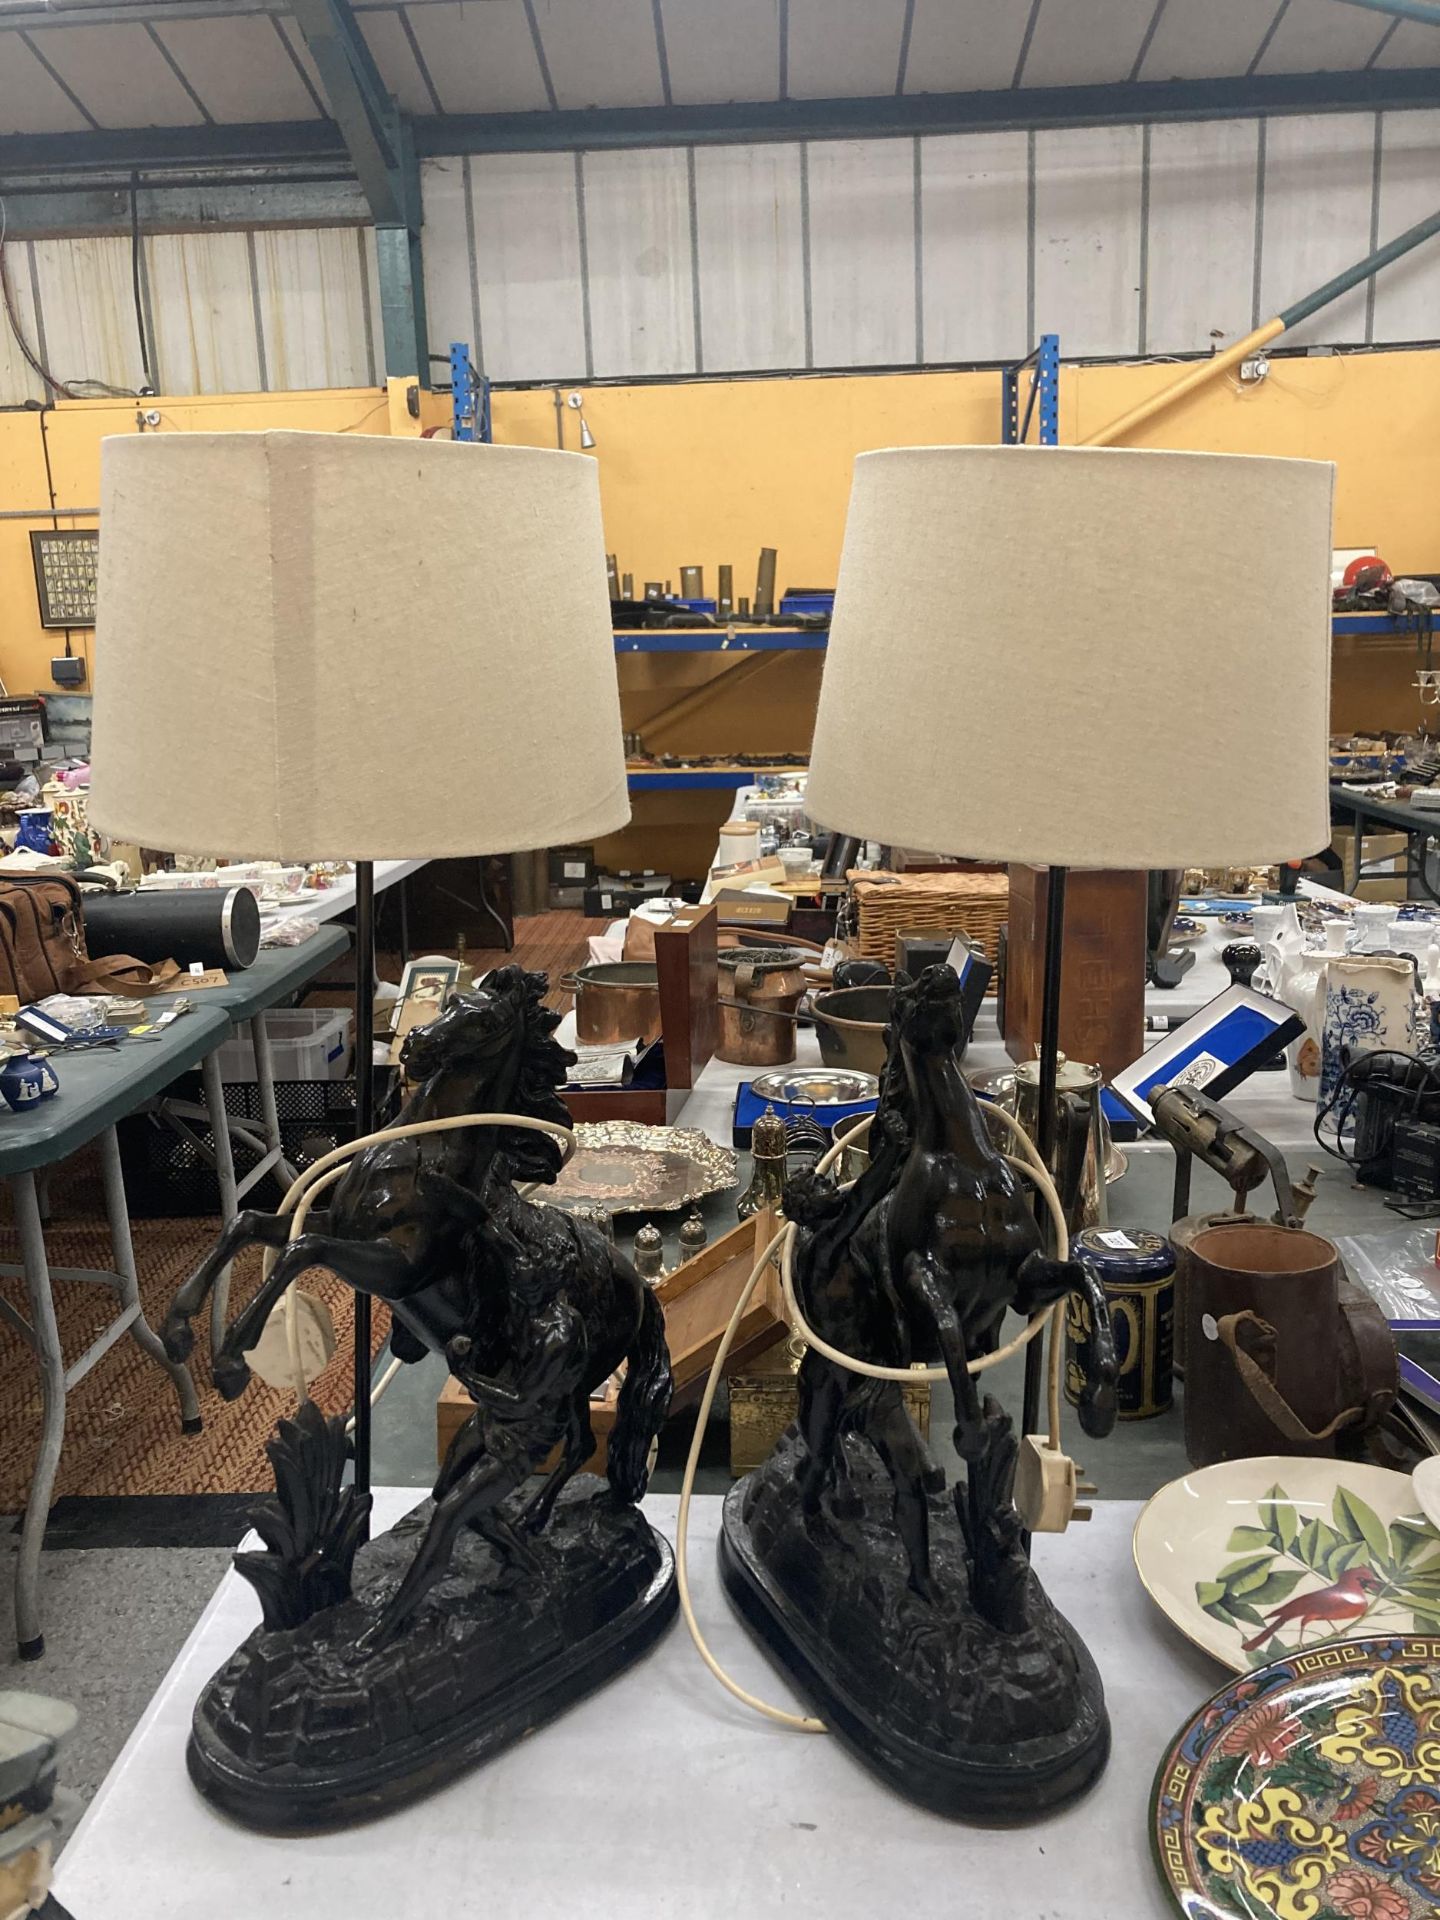 A LARGE PAIR OF MARLEY HORSE TABLE LAMPS WITH SHADES